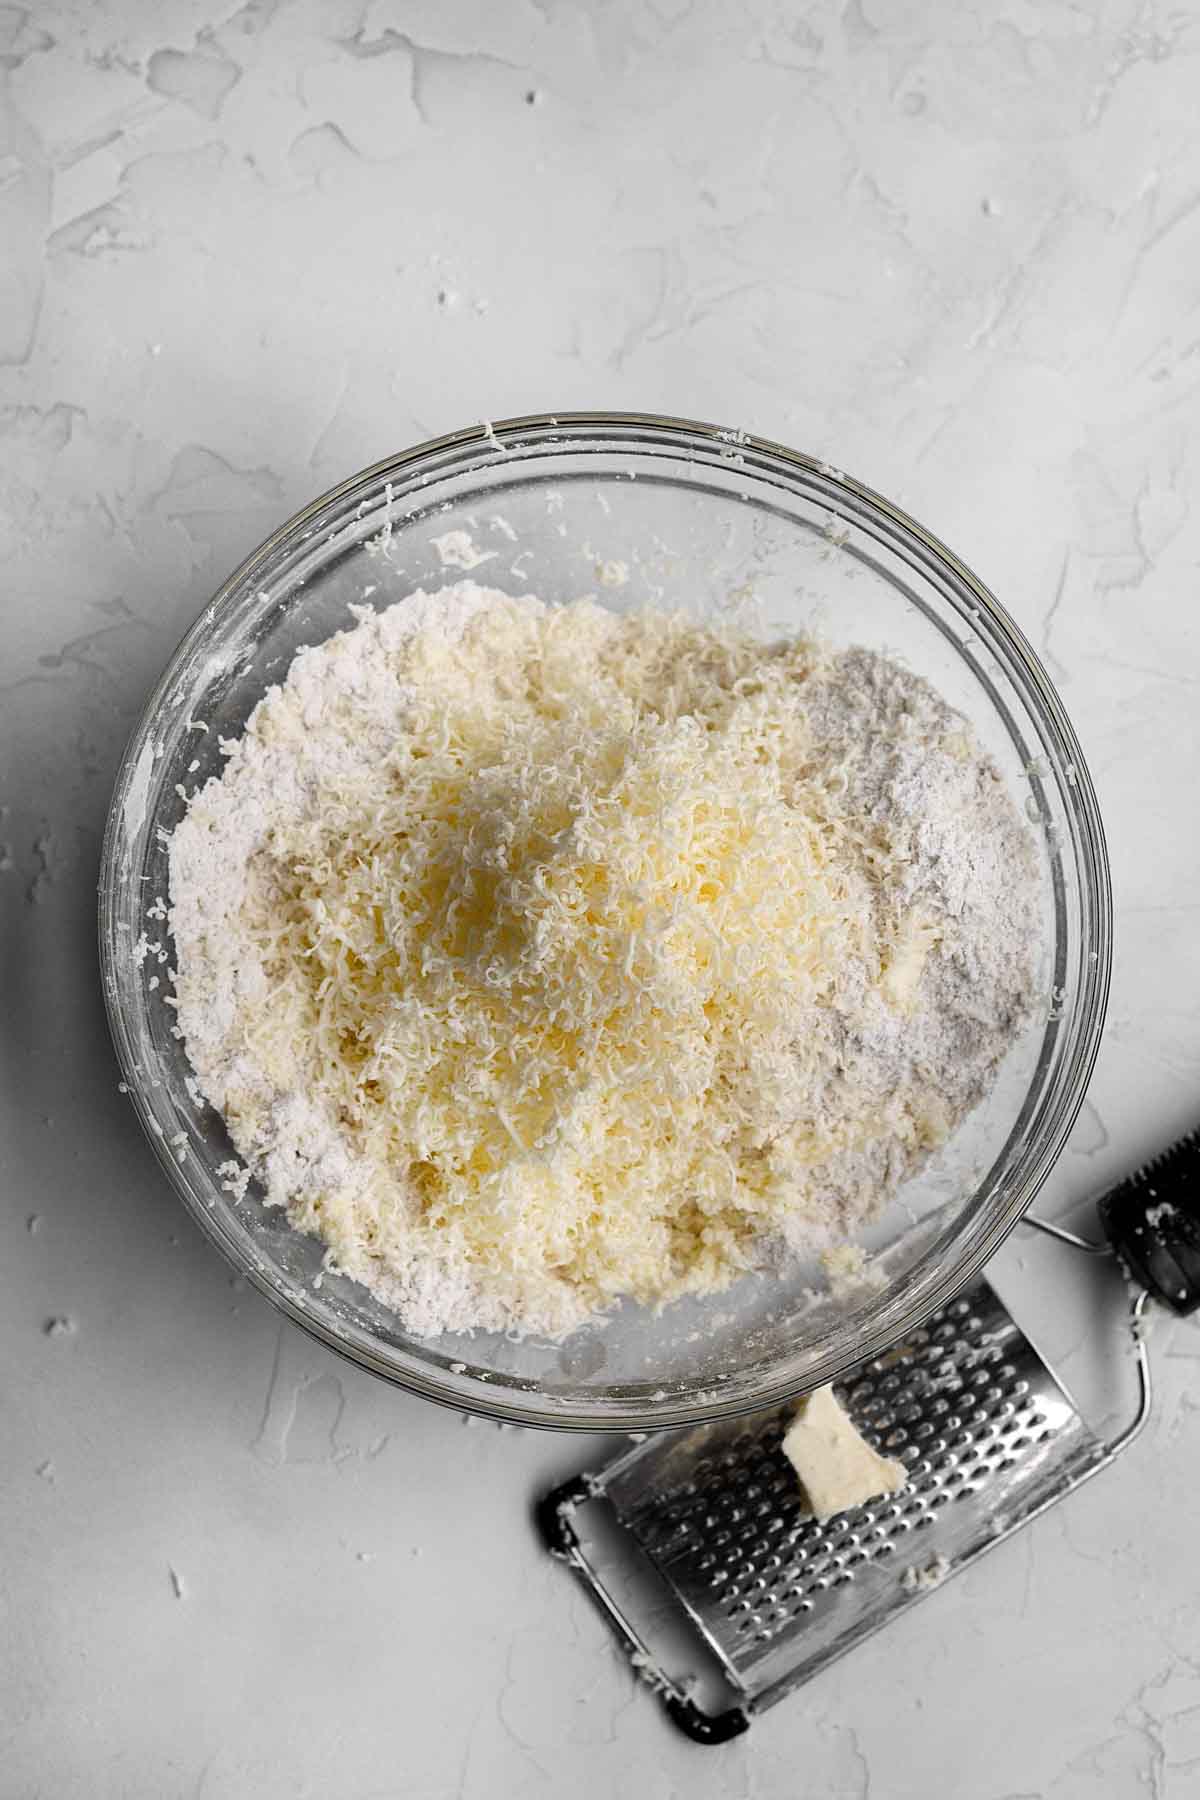 Grated butter added to the dry ingredients mixture.